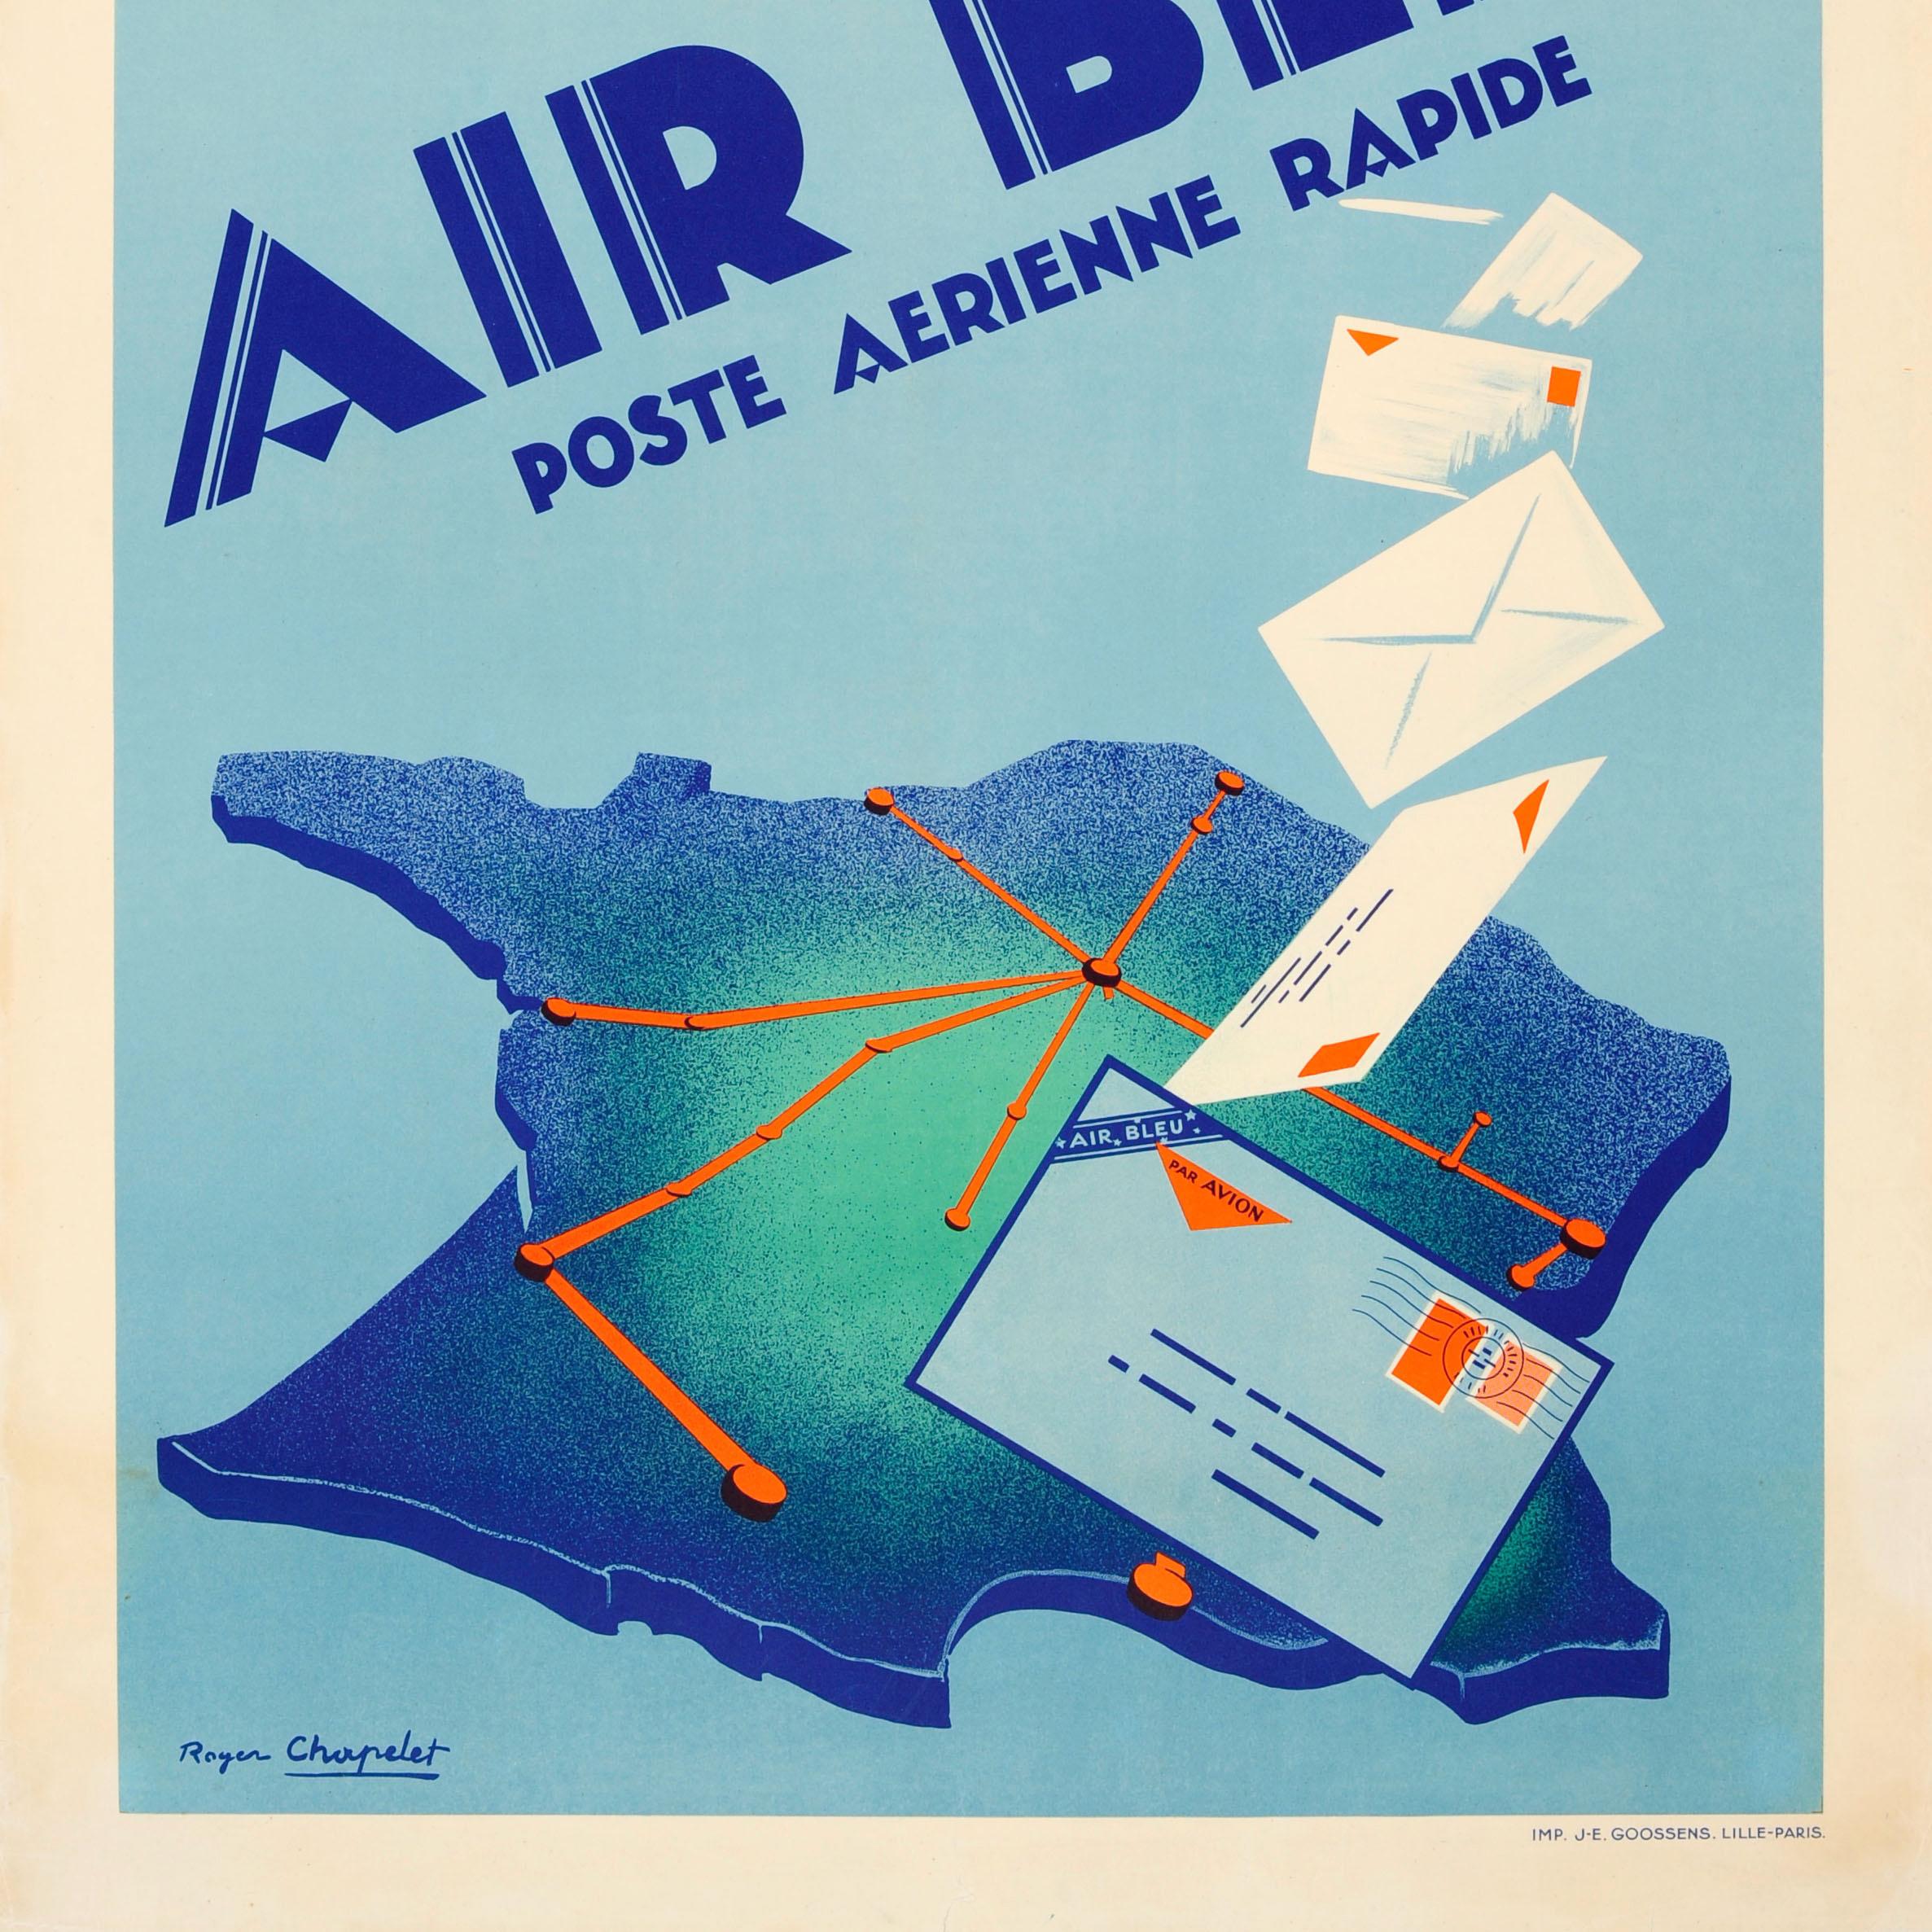 Original Vintage Art Deco Poster for Air Bleu Poste Aerienne Rapide Air Mail In Good Condition For Sale In London, GB